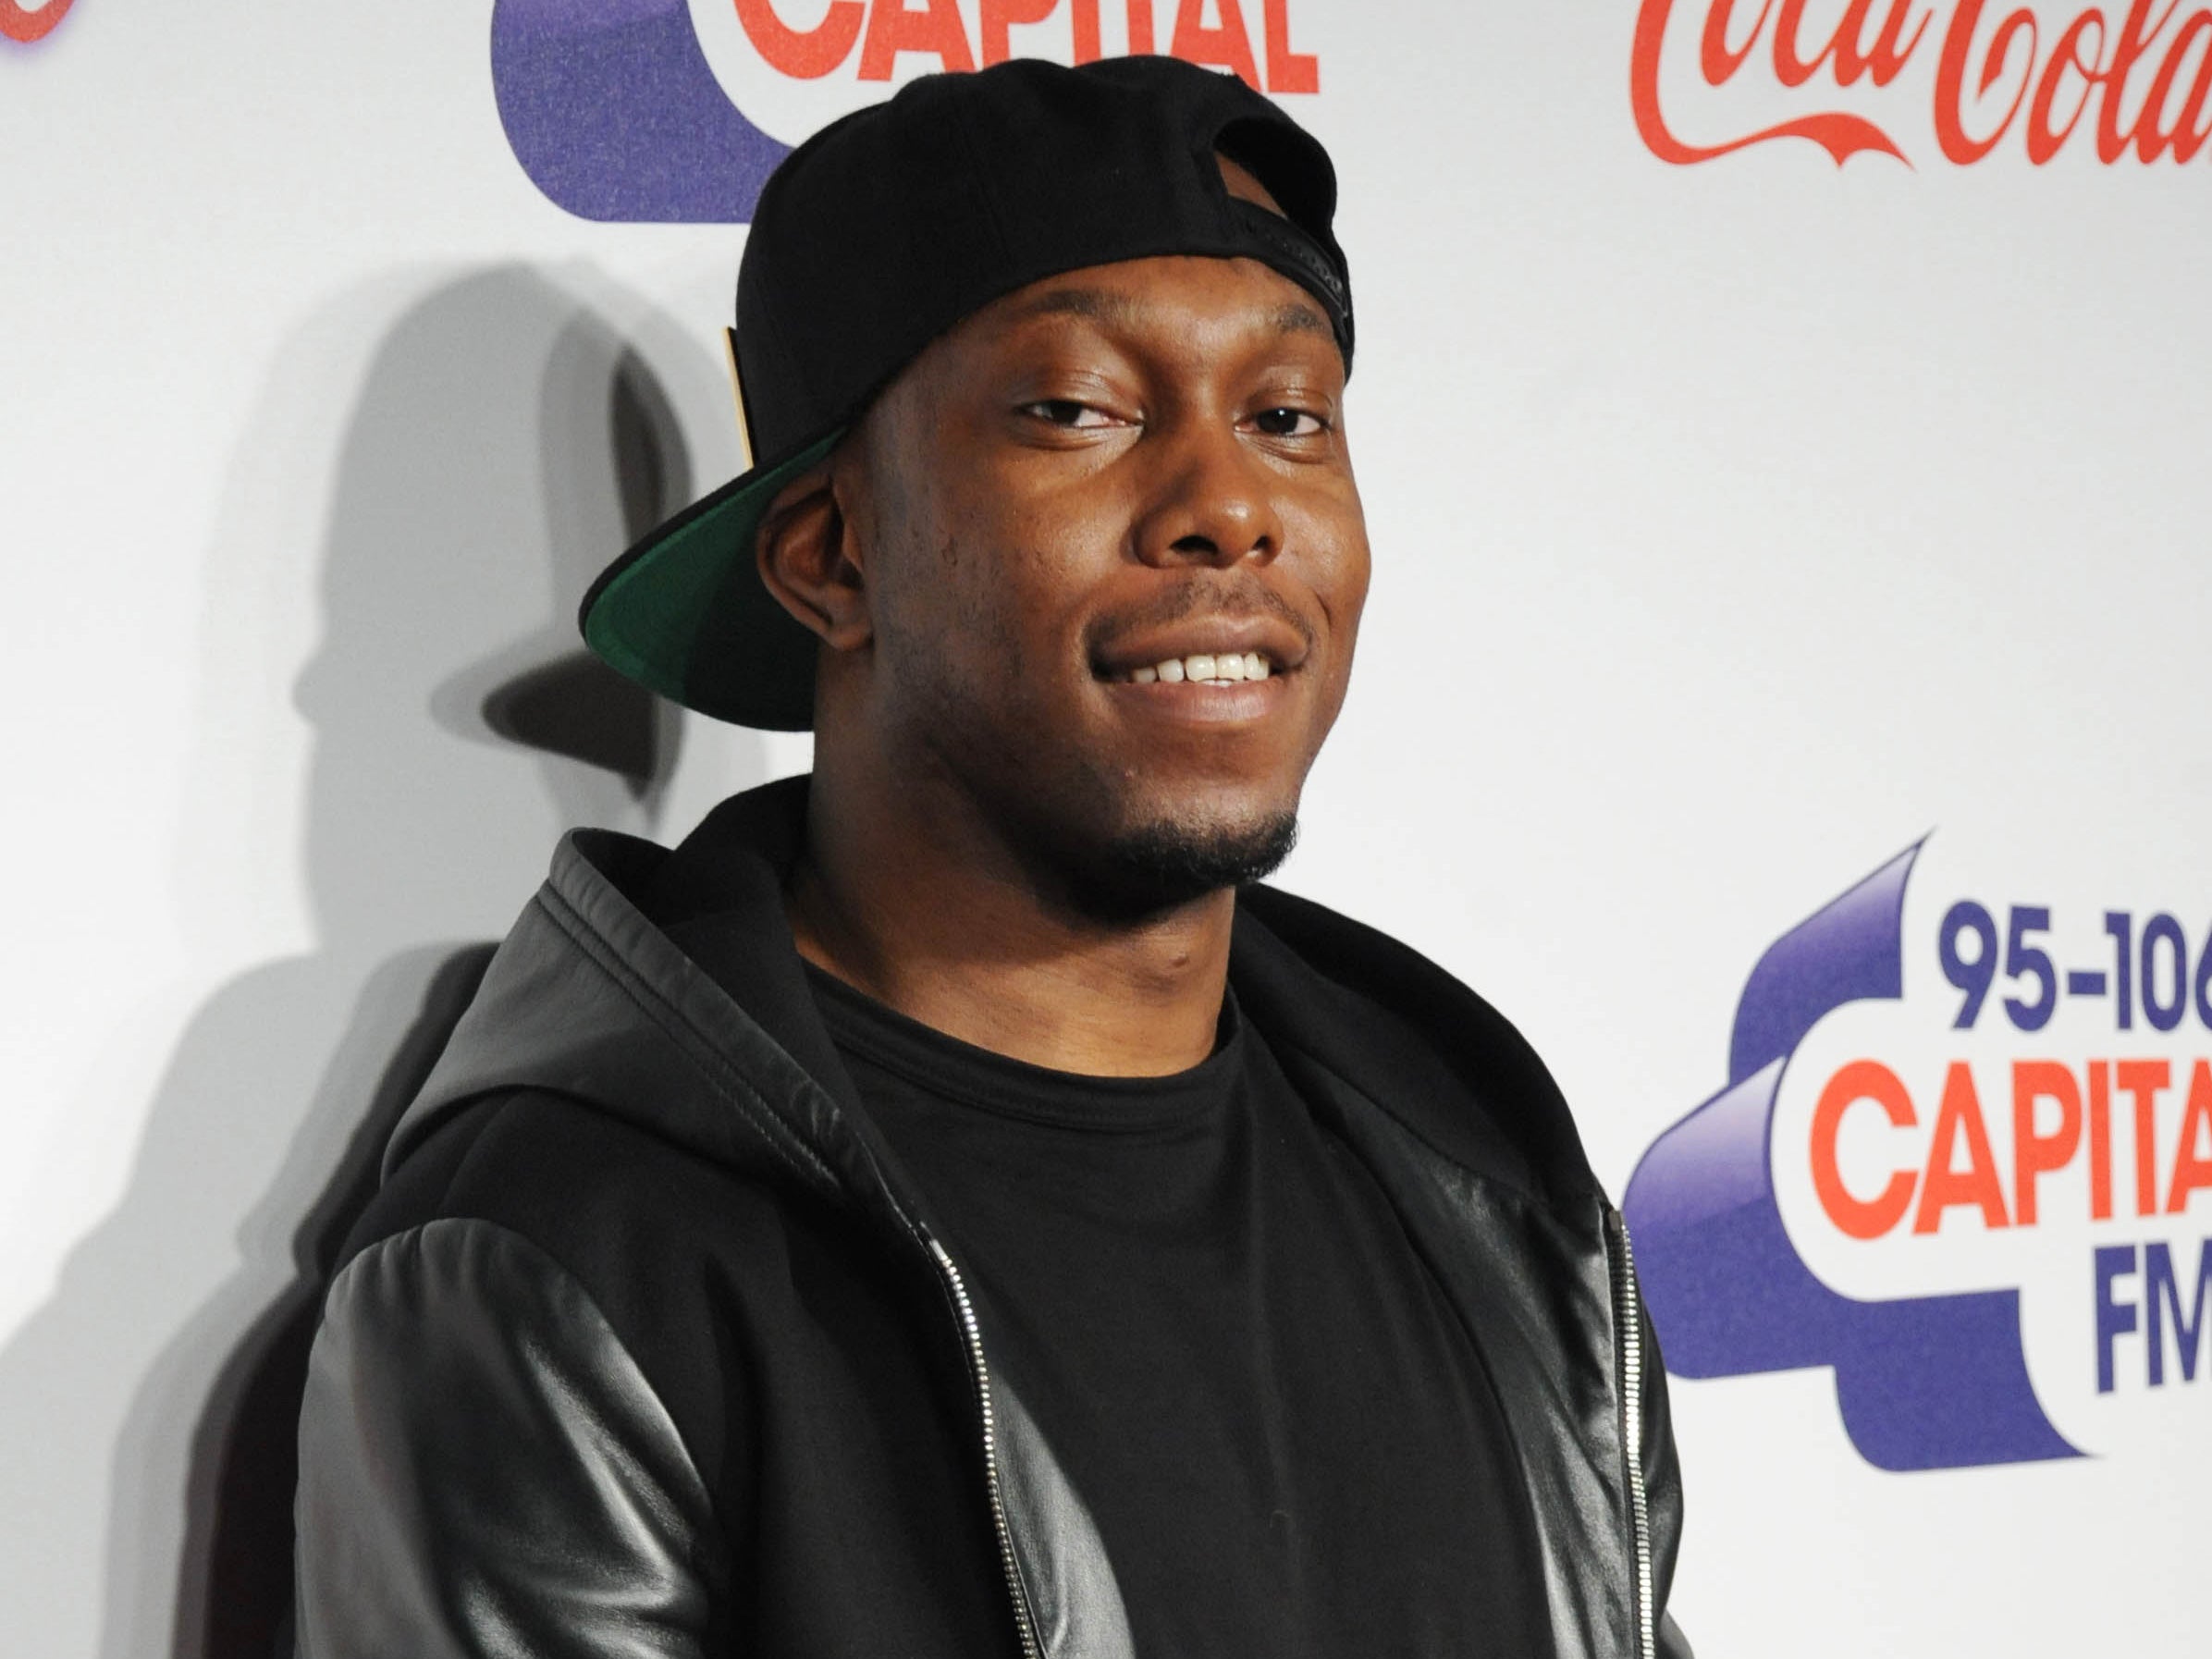 Dizzee Rascal has appealed for help to find the DJ